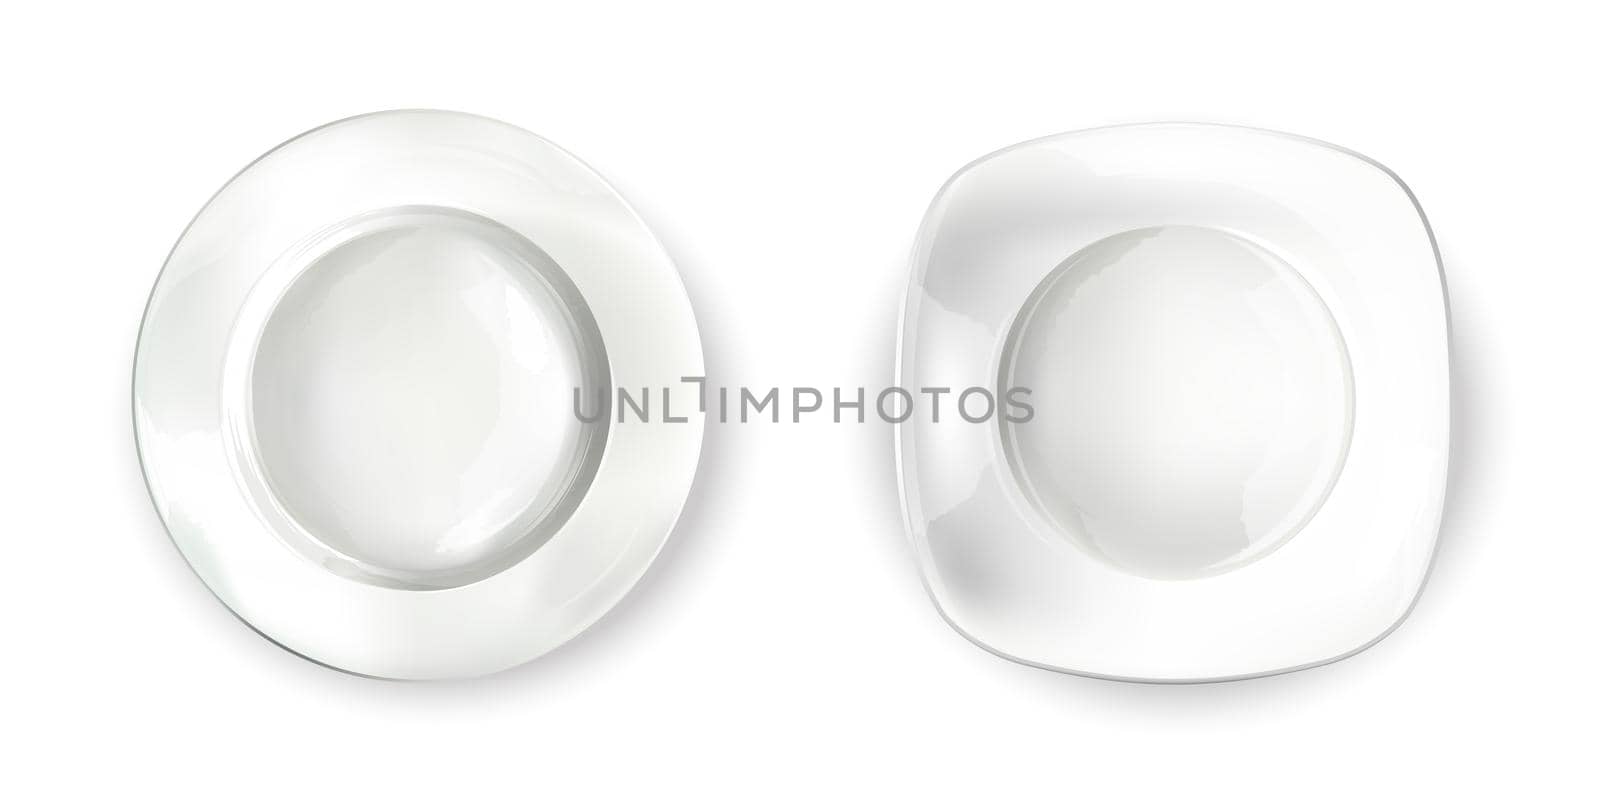 Two empty white plates of different shapes in a realistic style on a white background. Top view.